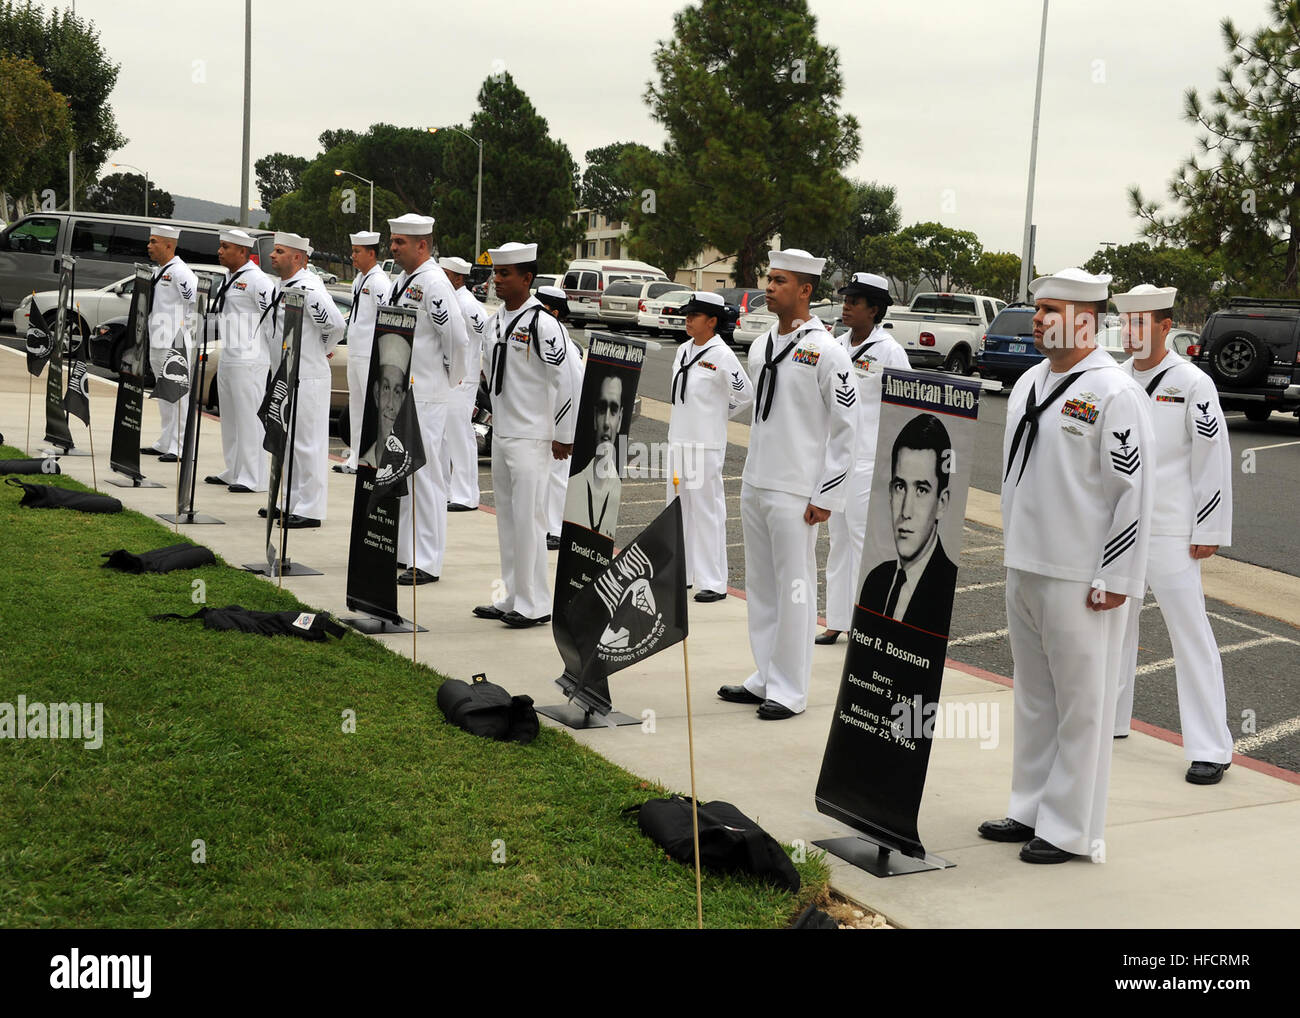 Sailors from the Naval Hospital Camp Pendleton 1st Class Petty Officers Association display the names and portraits of seven Navy hospital corpsmen still missing from the Vietnam War during a service of remembrance at the Prisoner of War/Missing in Action (POW/MIA) Memorial on National POW/MIA Recognition Day. Naval Hospital Camp Pendleton held its 23nd annual POW/MIA Remembrance Ceremony on the front lawn of the hospital at the POW/MIA memorial site. (U.S. Navy photo by Mass Communication Specialist 1st Class Michael R. McCormick/Released) POW-MIA service 130920-N-HJ915-155 Stock Photo